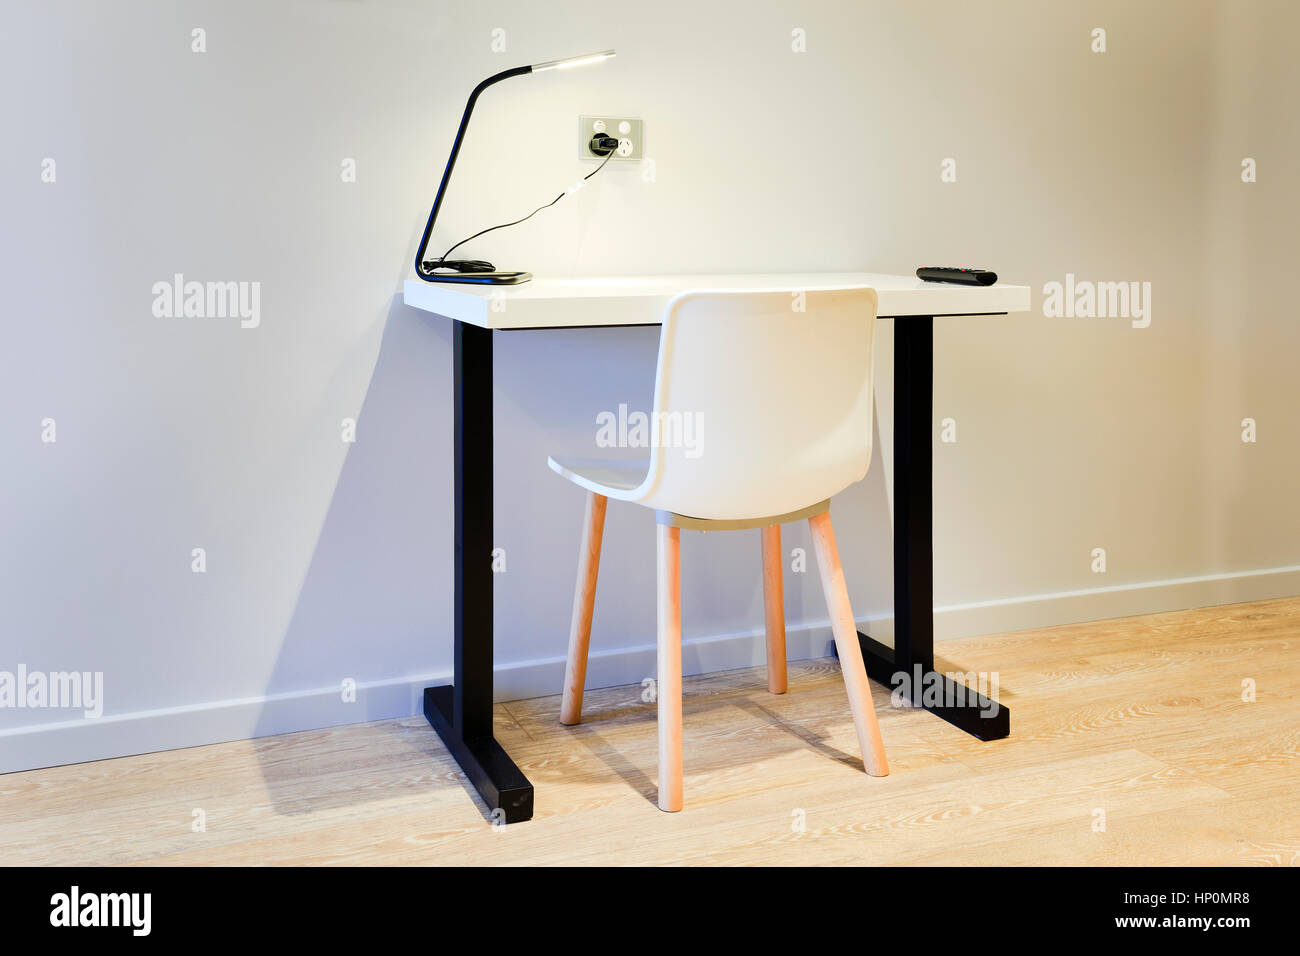 Single modern compact study computer desk with chair for laptop and education of students. Minimalistic design with table lamp and free space around. Stock Photo